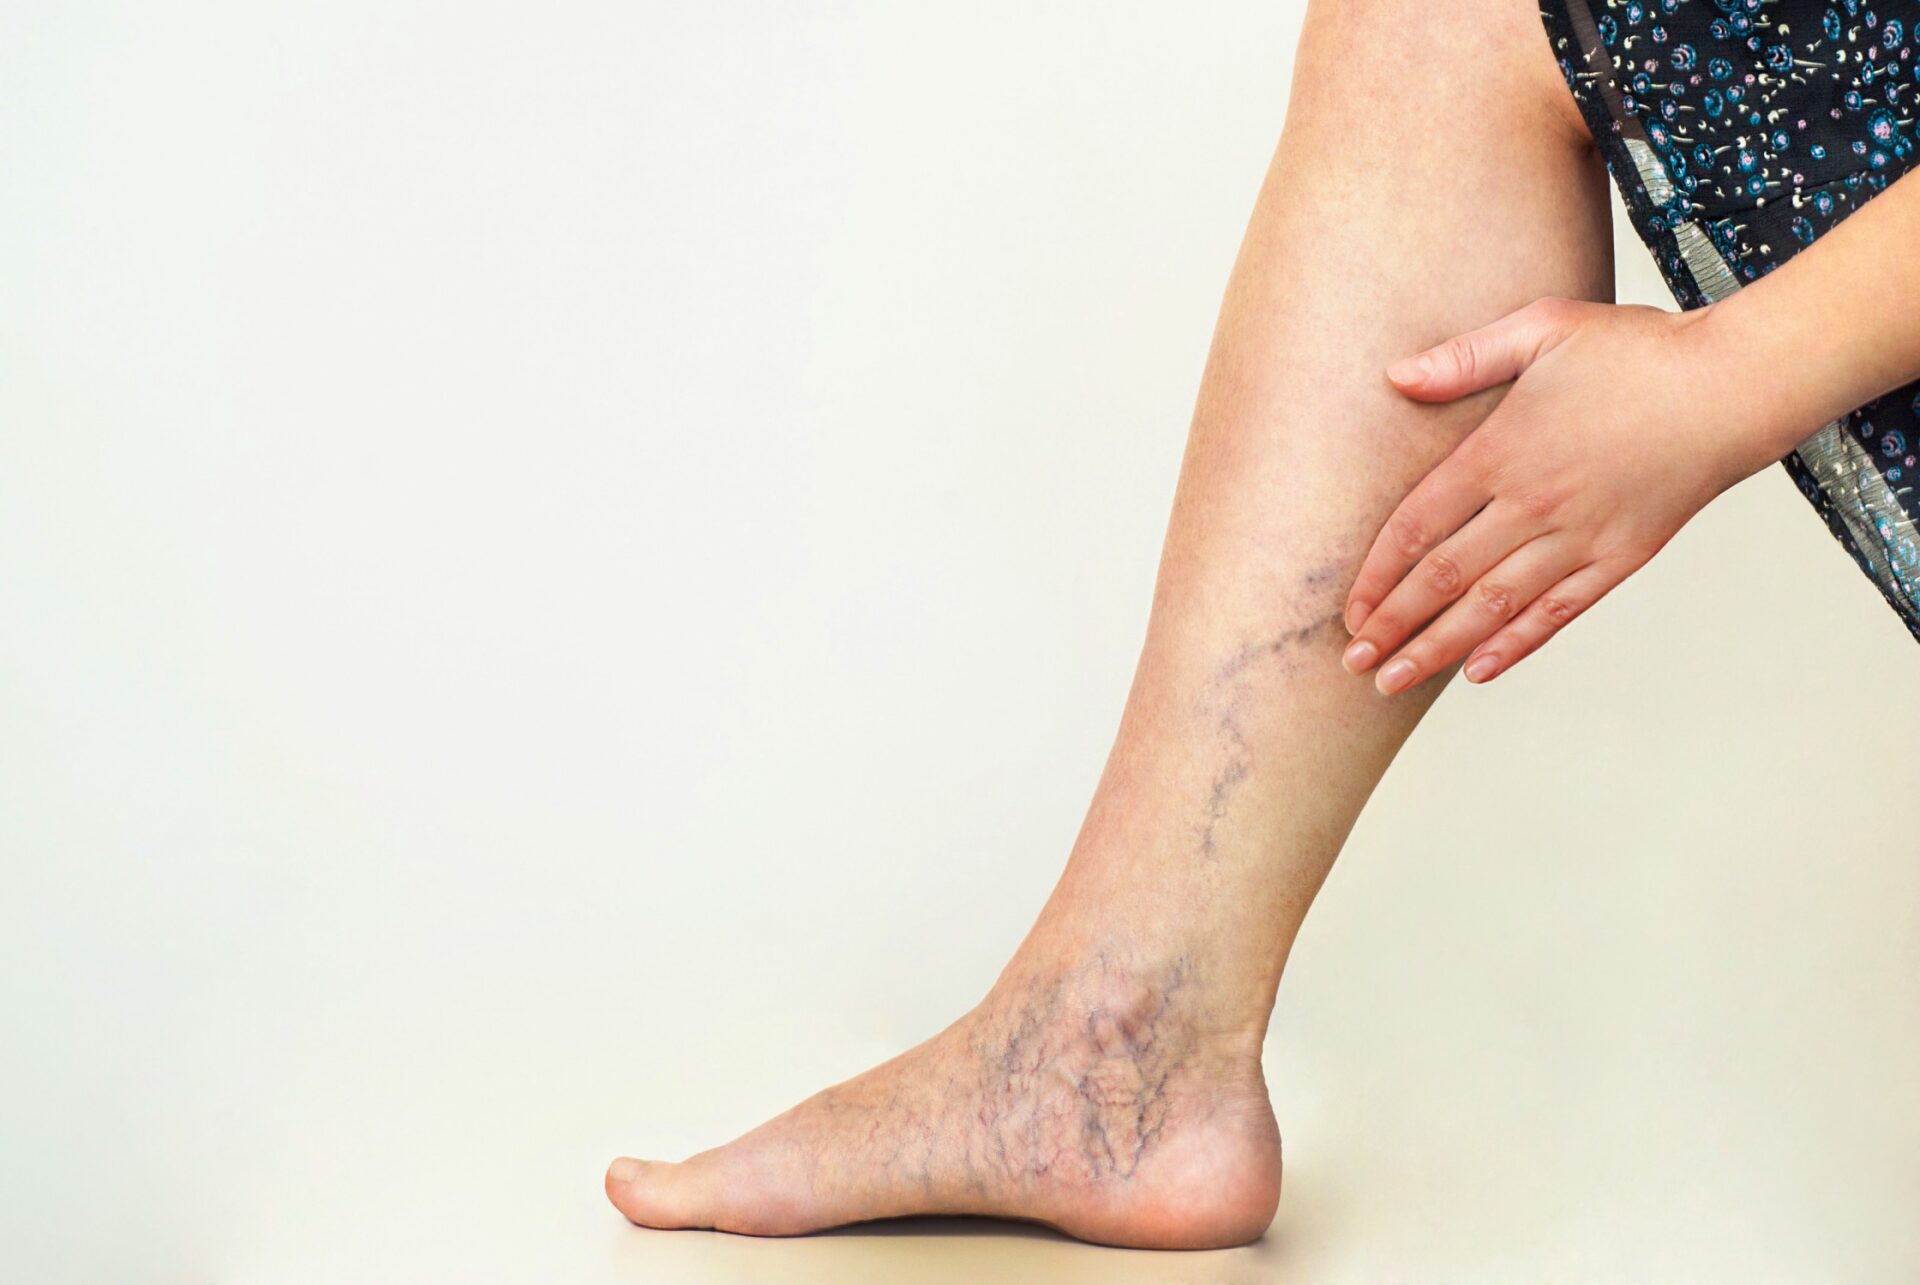 Understanding the different treatment options available for varicose veins in NJ